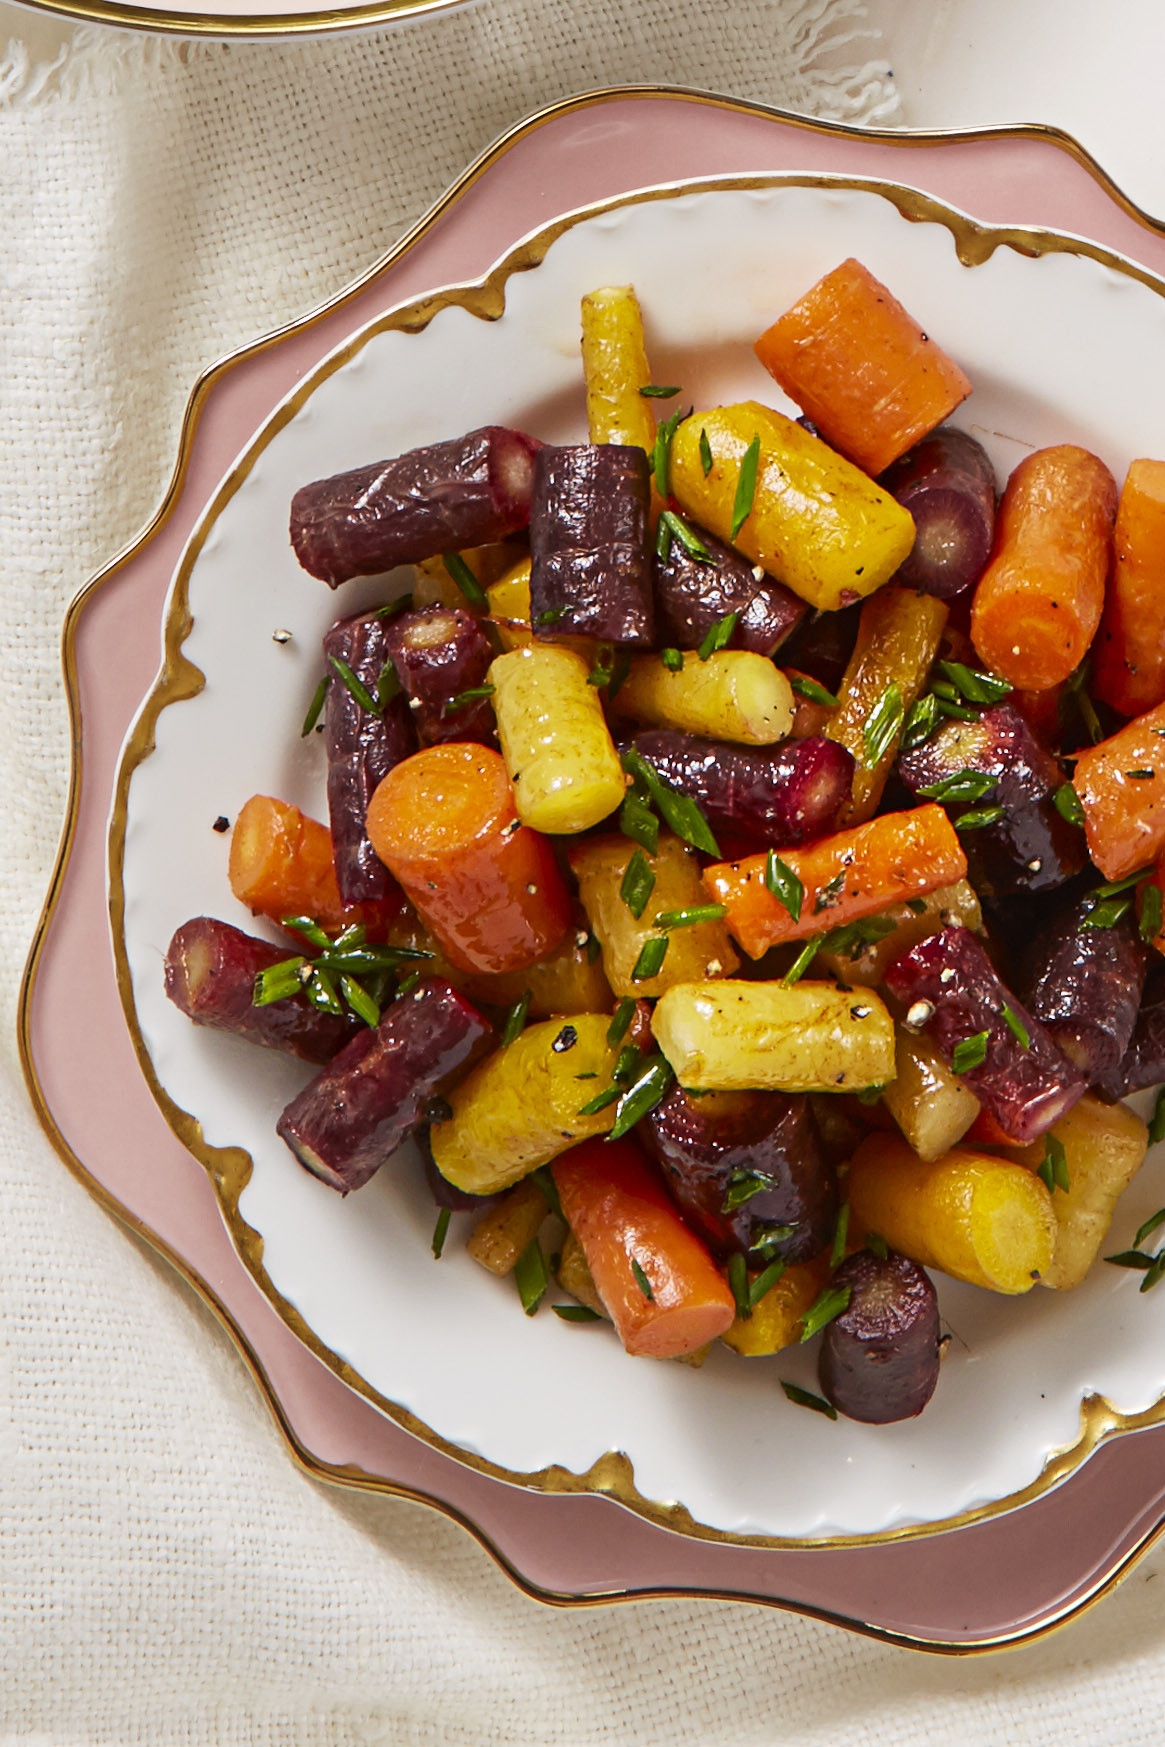 Easy Side Dishes For Easter
 Best Butter Glazed Rainbow Carrots Recipe How to Make